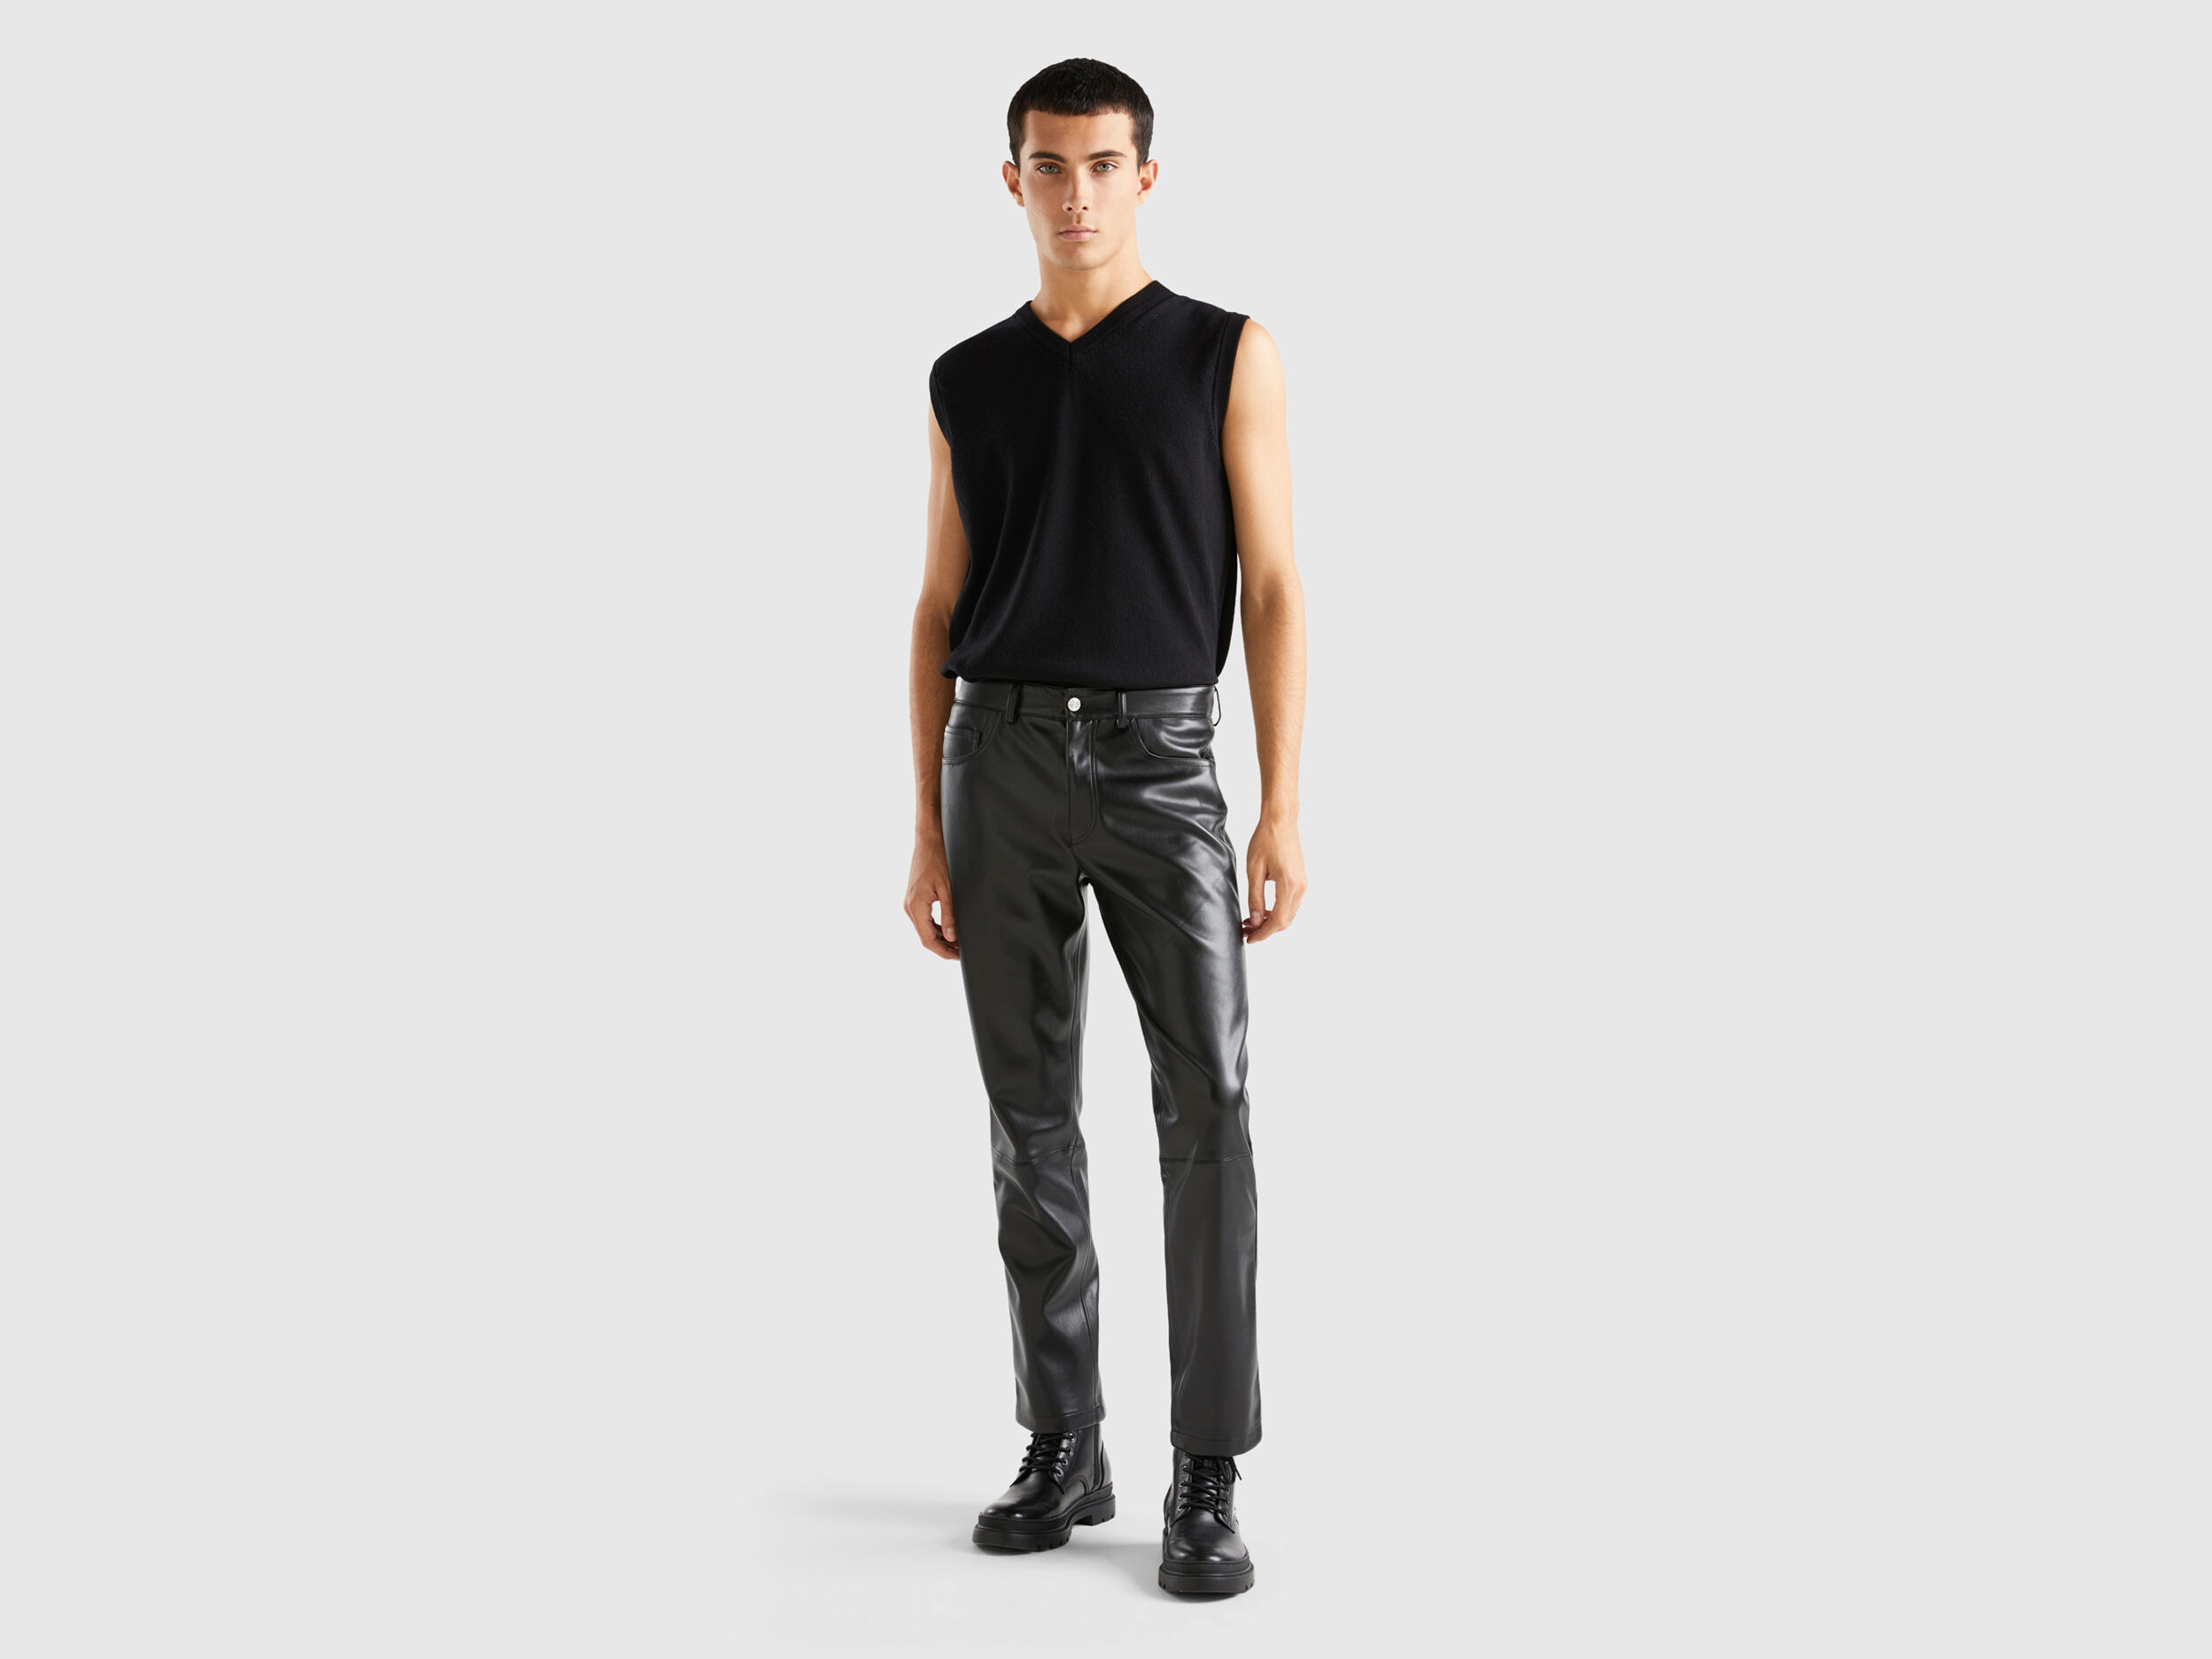 Imitation leather trousers - Dark brown - Men | H&M IN